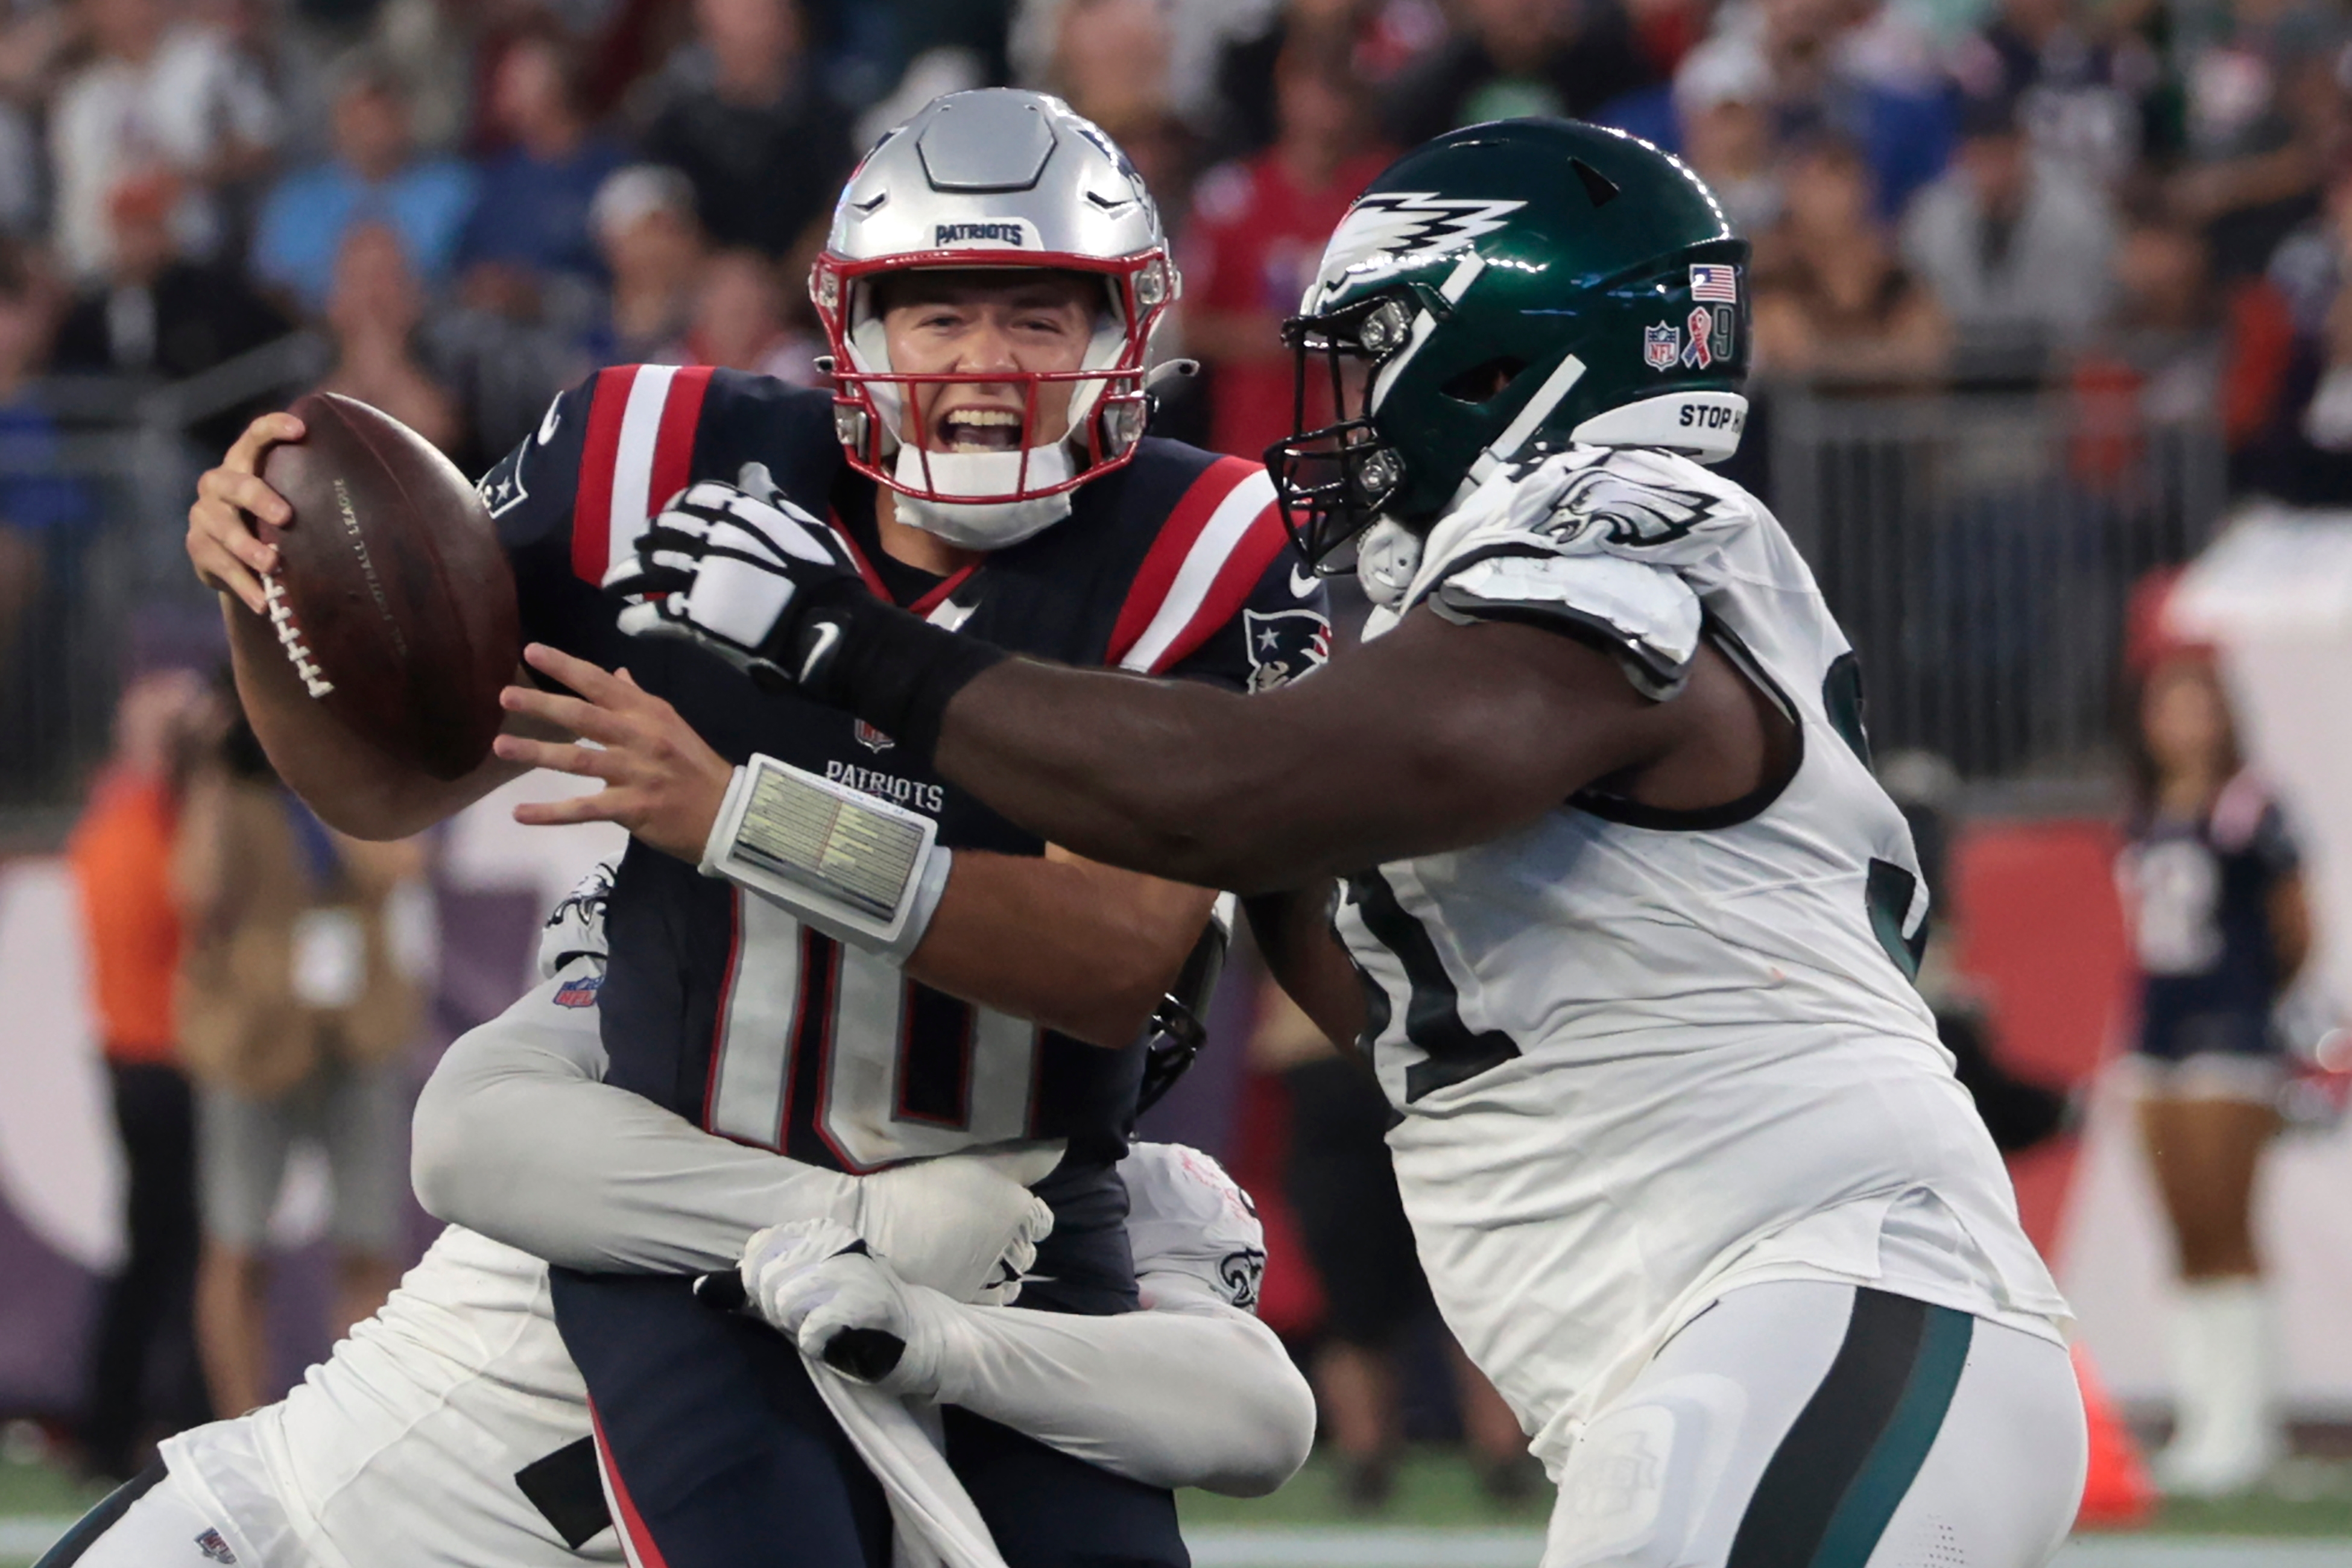 Patriots hold off Bucs for 19-14 victory on Thursday Night Football